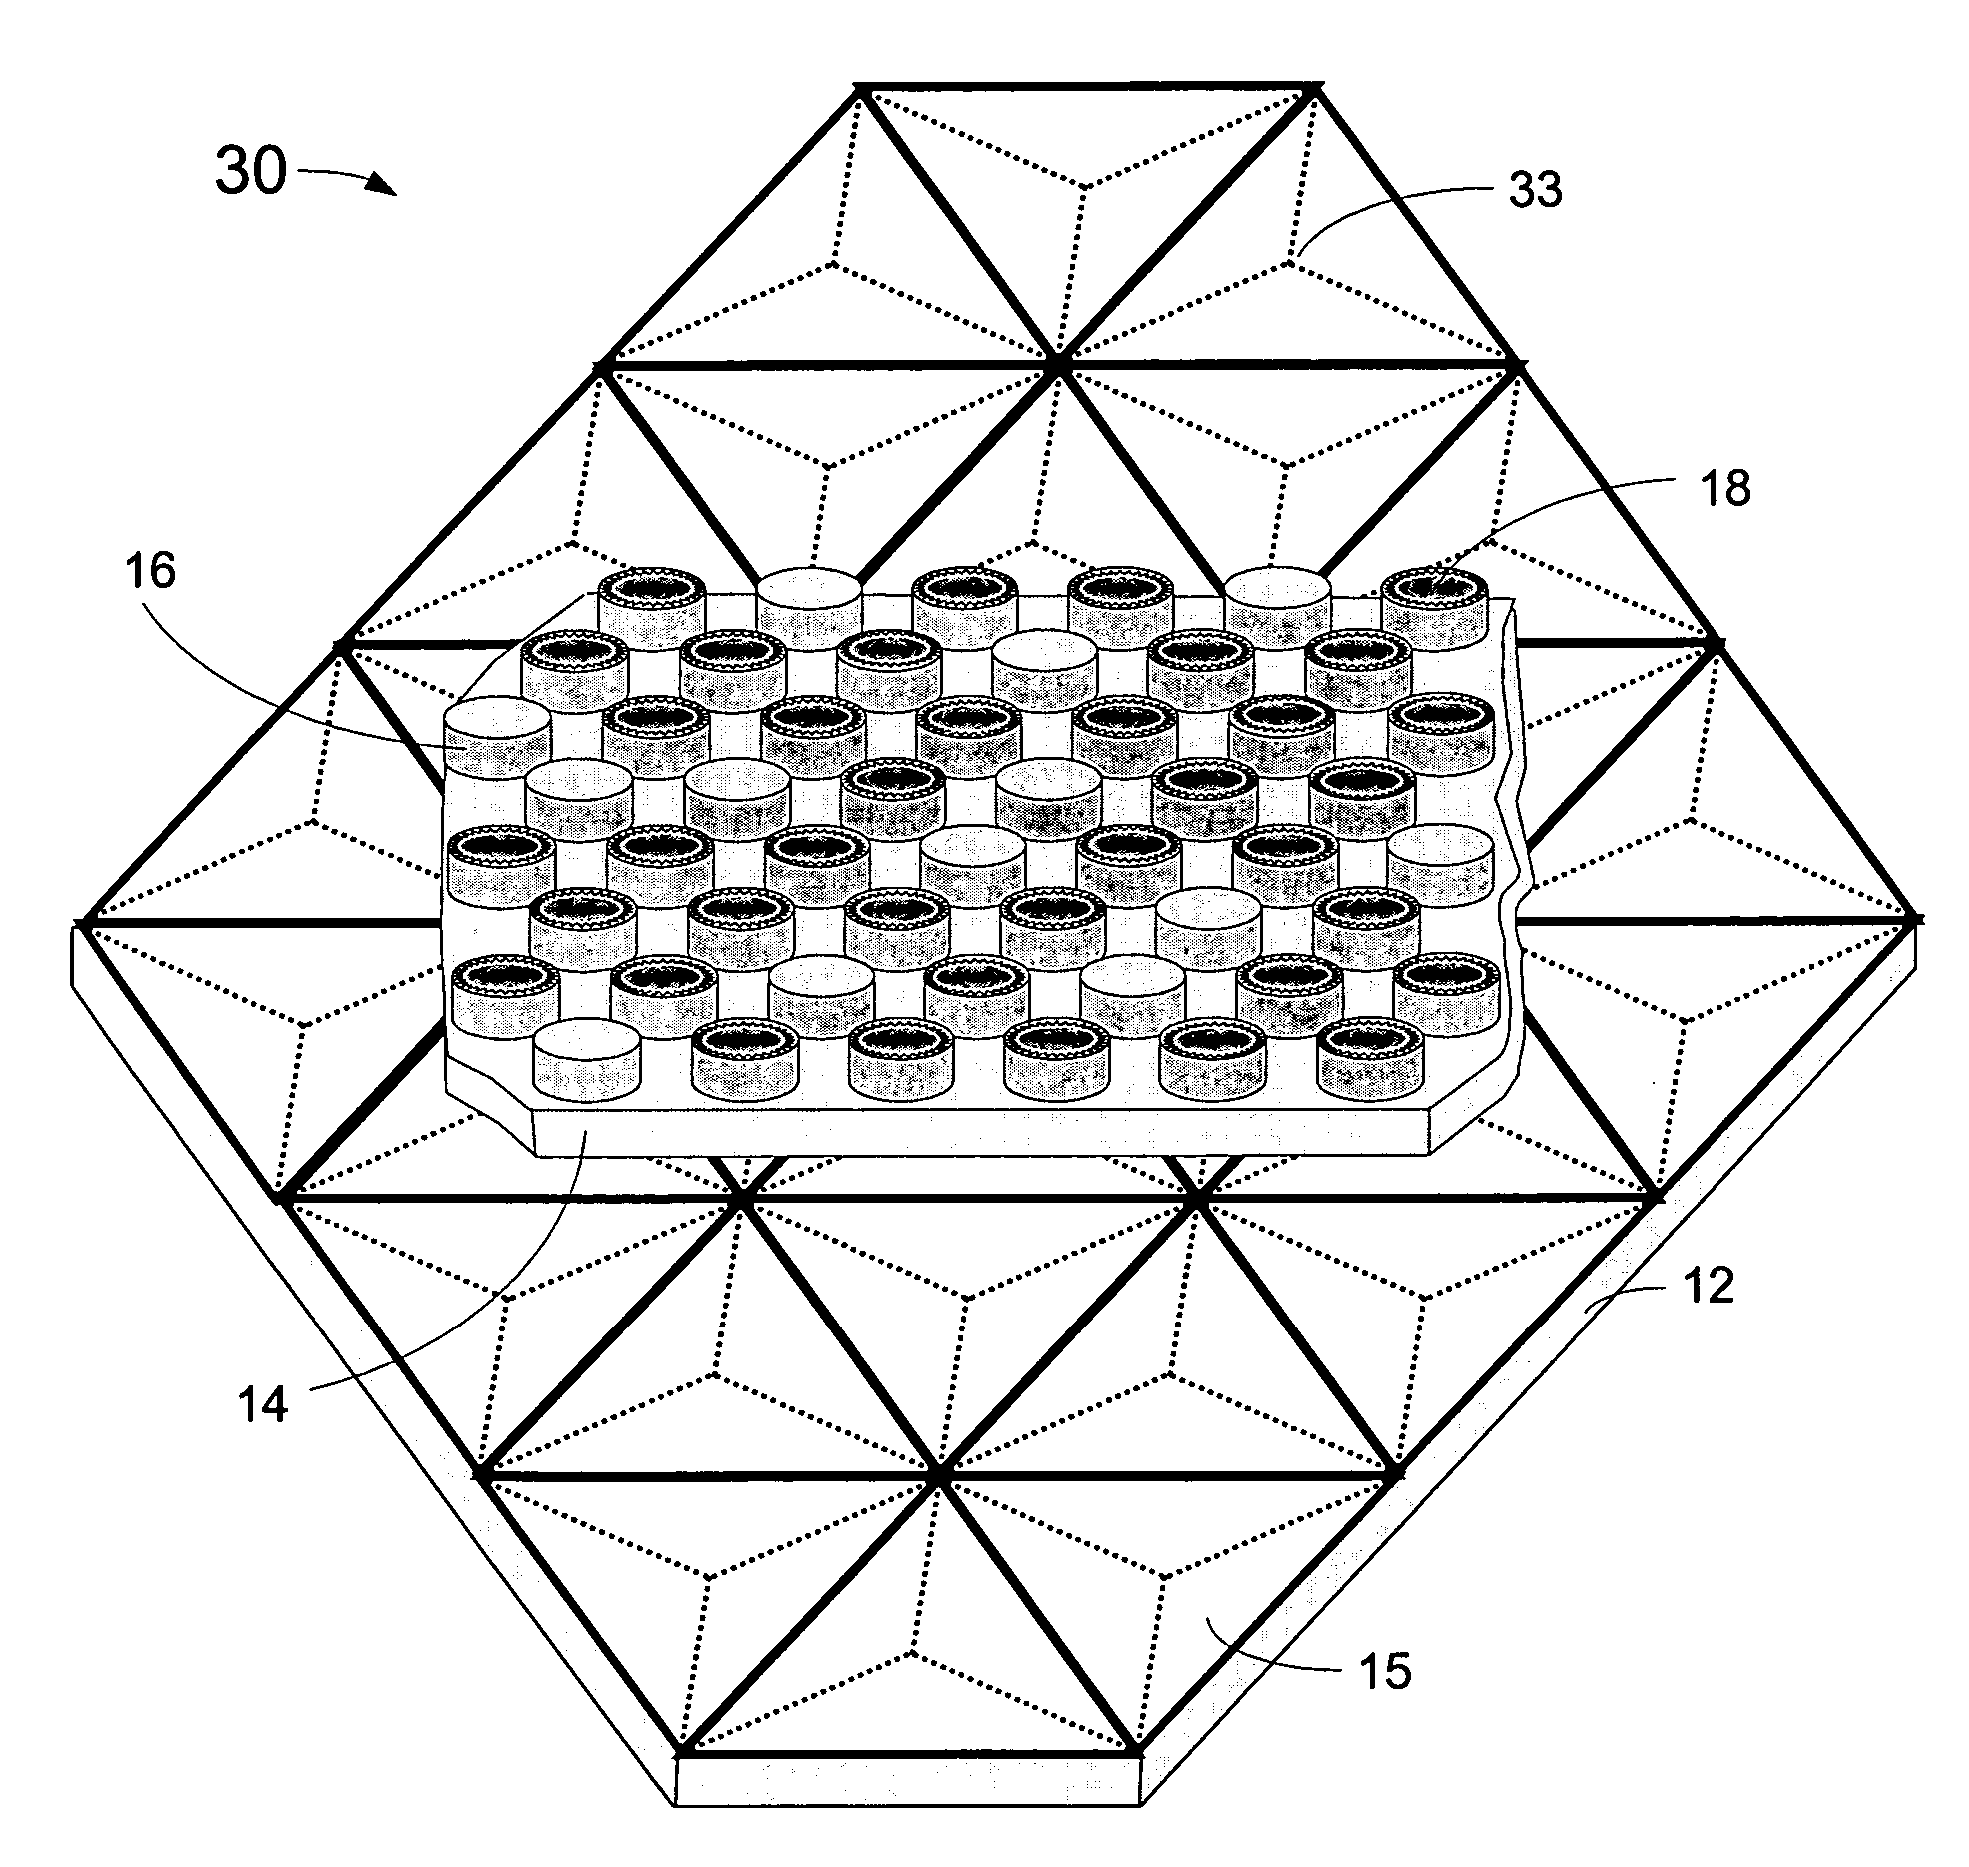 Microstructured optical device for remote chemical sensing